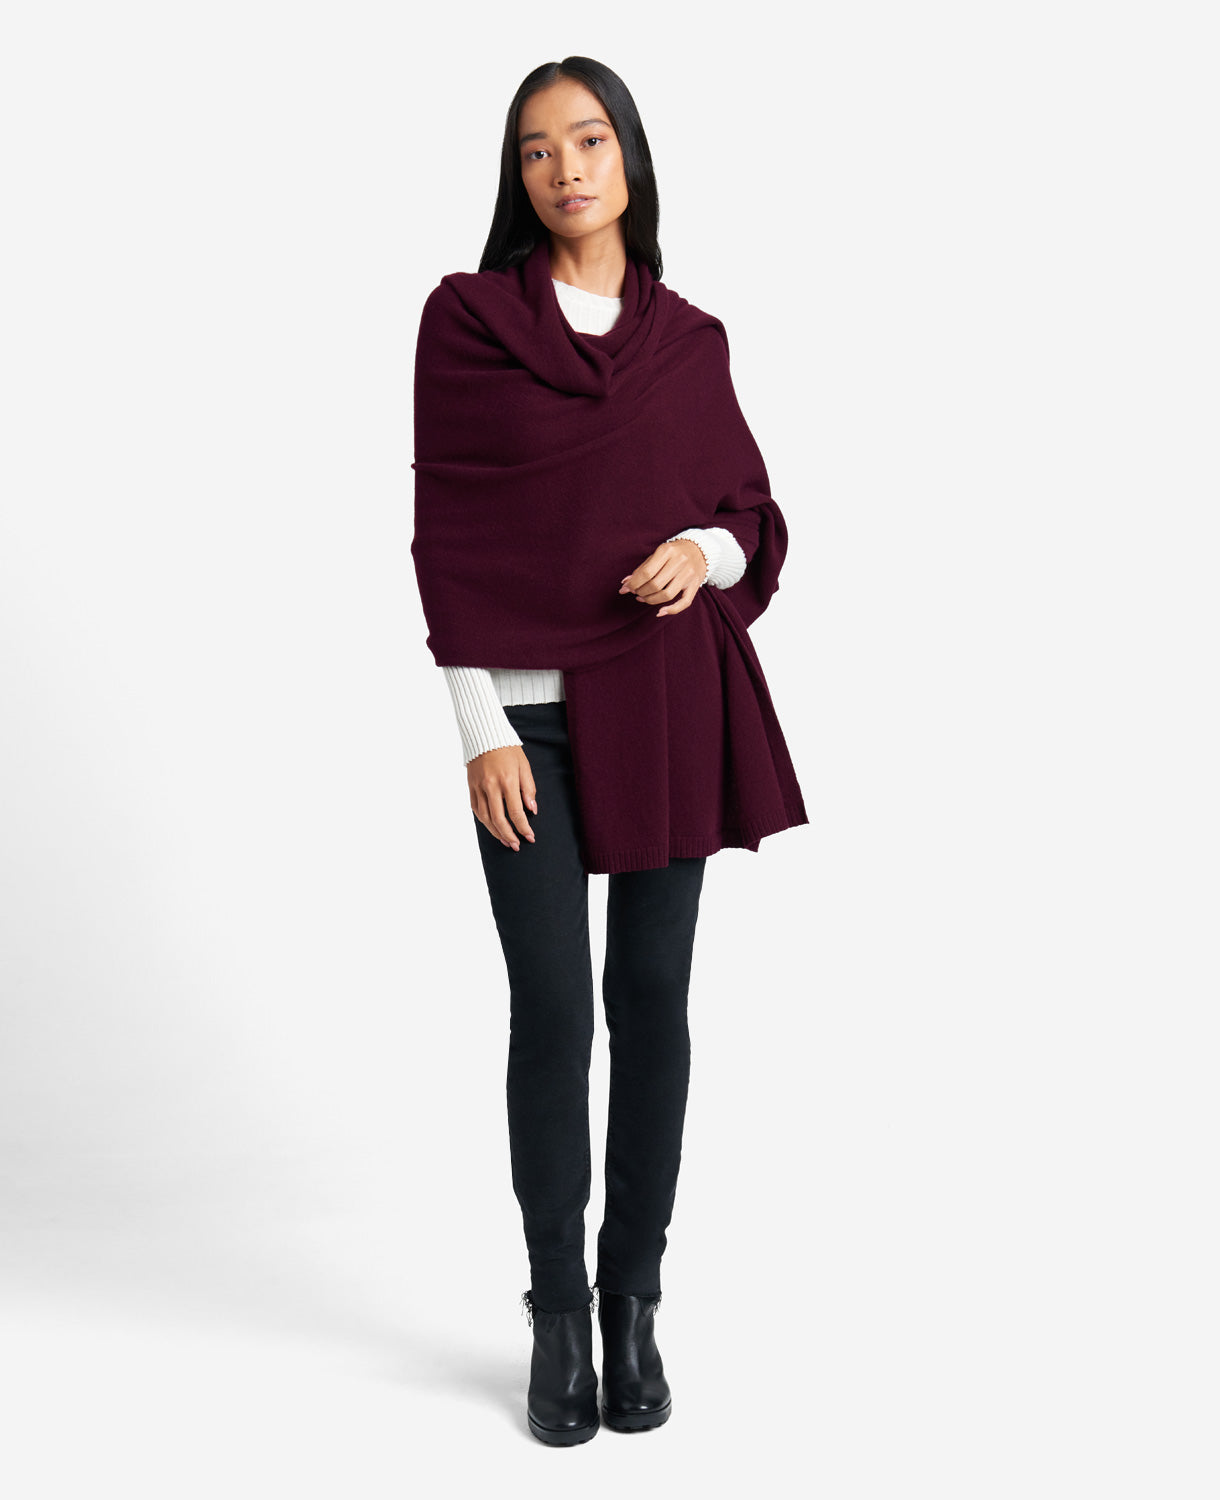 Kenneth Cole Site Exclusive! Pure Cashmere Multi-wear Wrap In Burgundy